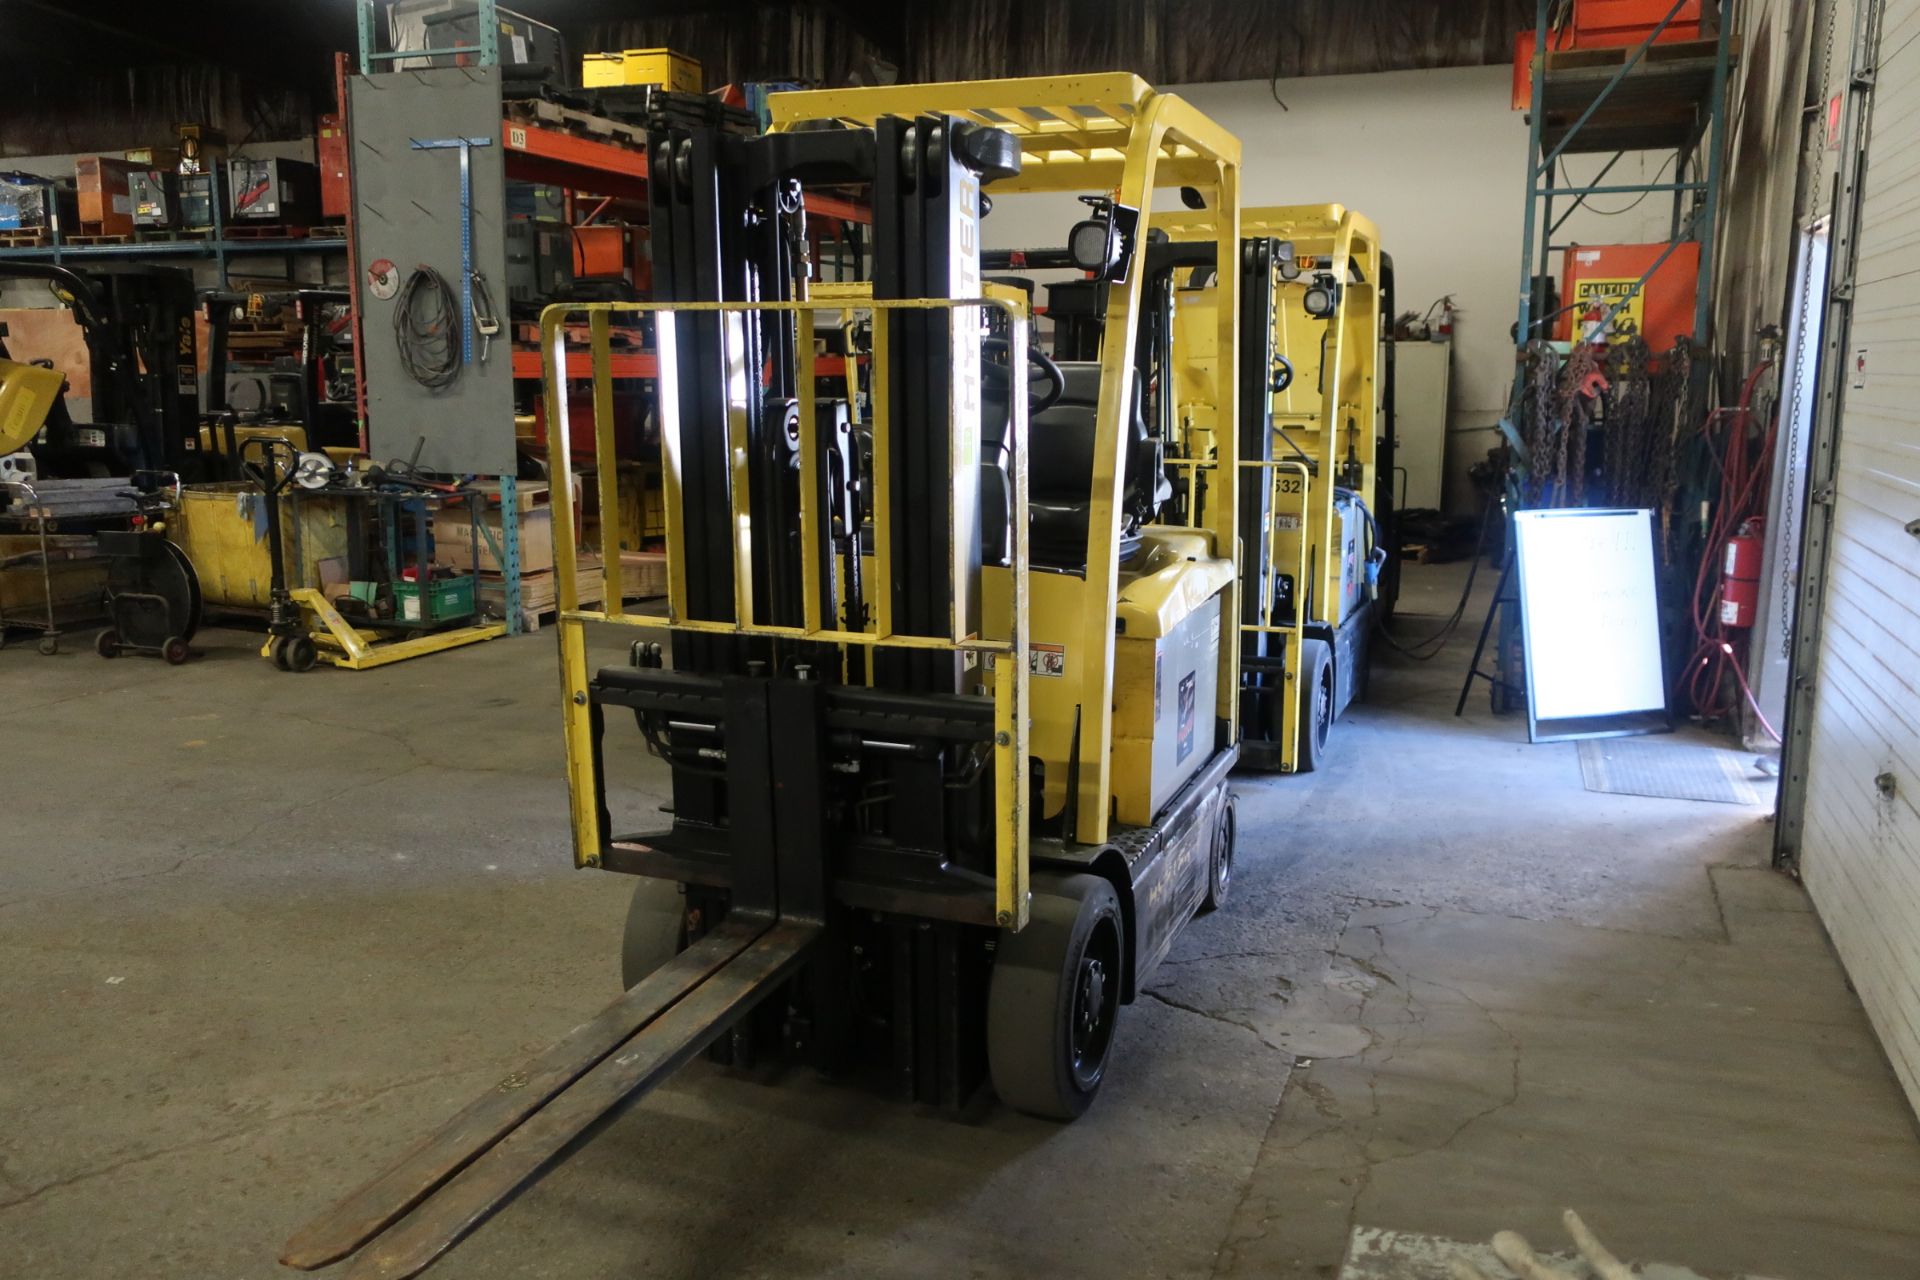 FREE CUSTOMS - 2011 Hyster 5000lbs Capacity Forklift with 3-stage mast - electric with charger - Image 2 of 2